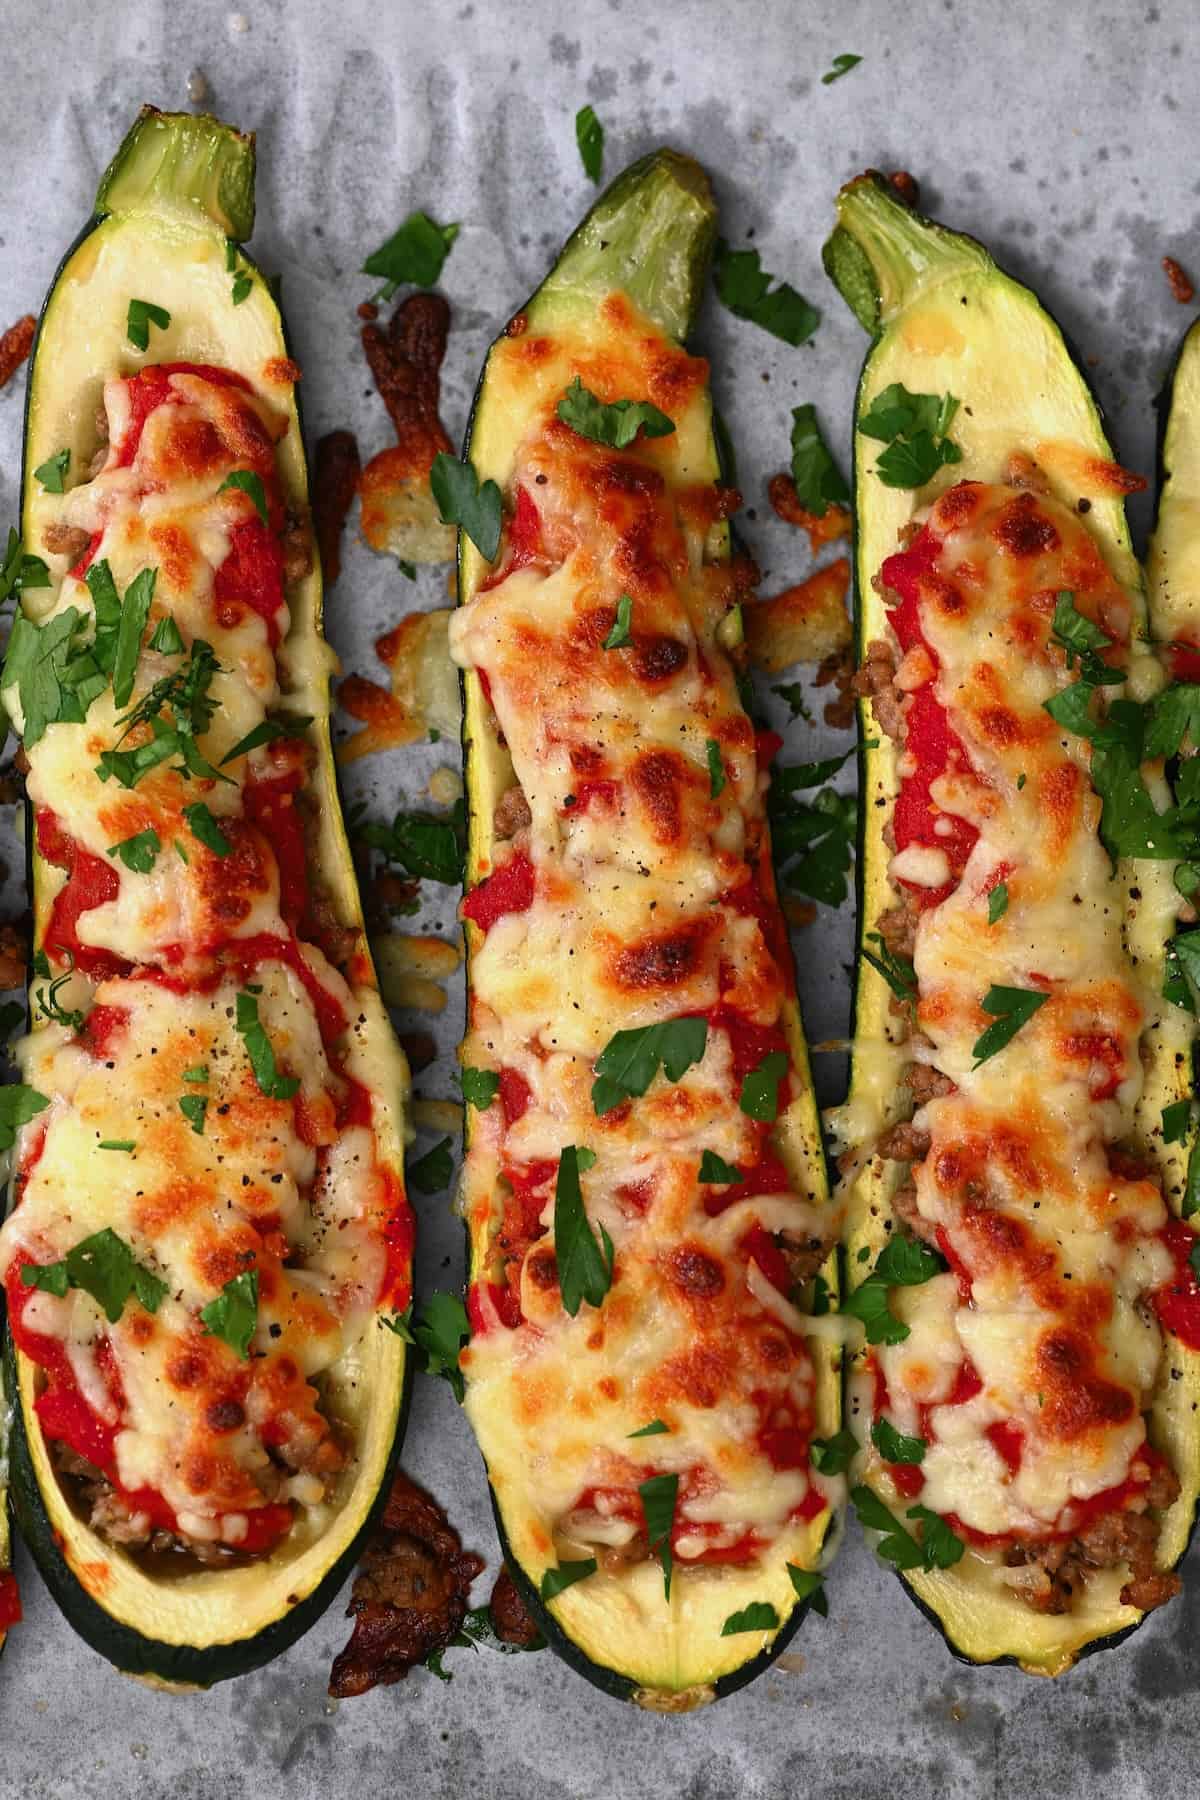 Three halves of stuffed zucchini topped with cheese and parsley